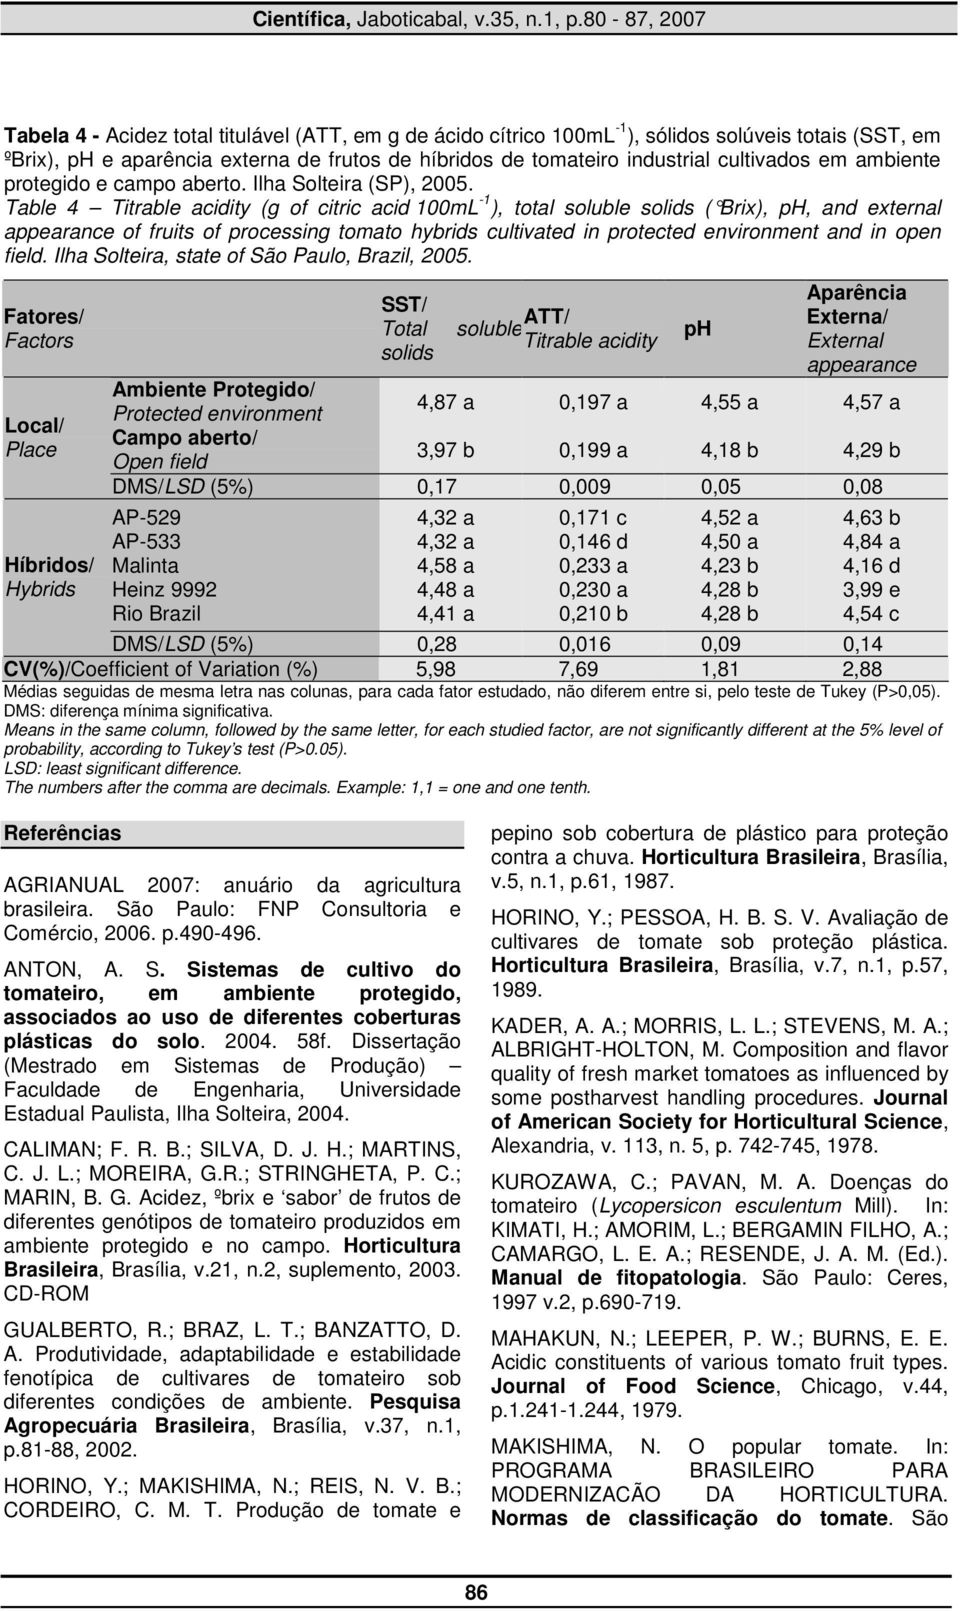 Table 4 Titrable acidity (g of citric acid 100mL -1 ), total soluble solids ( Brix), ph, and external appearance of fruits of processing tomato hybrids cultivated in protected environment and in open